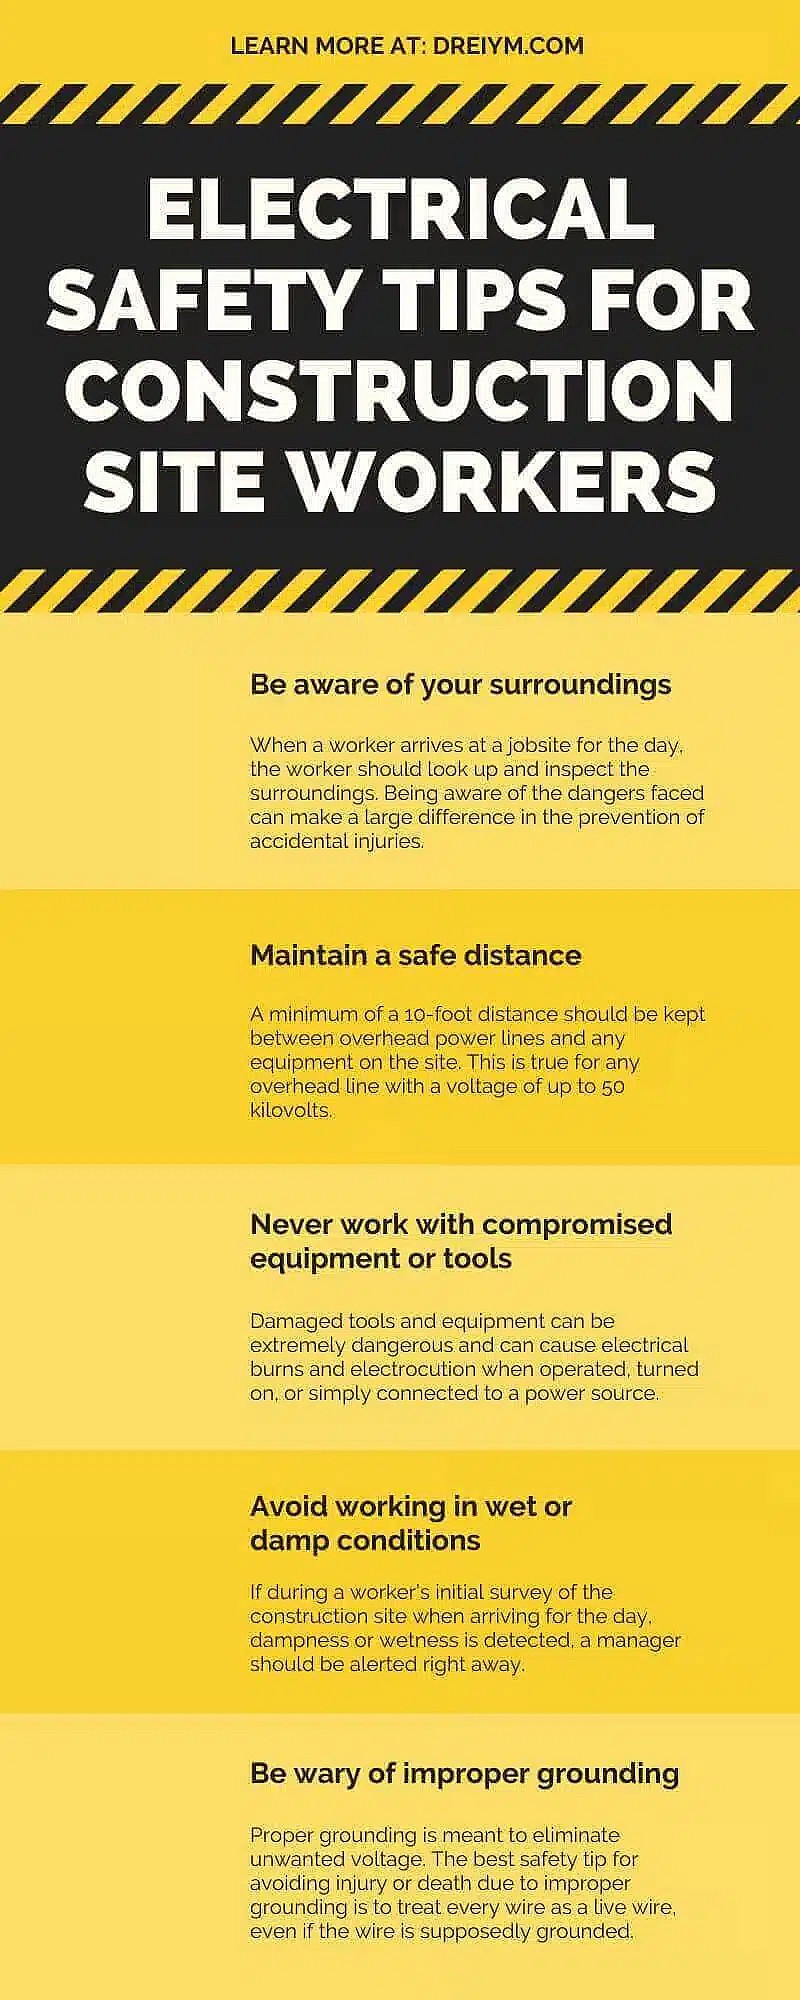 Electrical Safety Tips for Construction